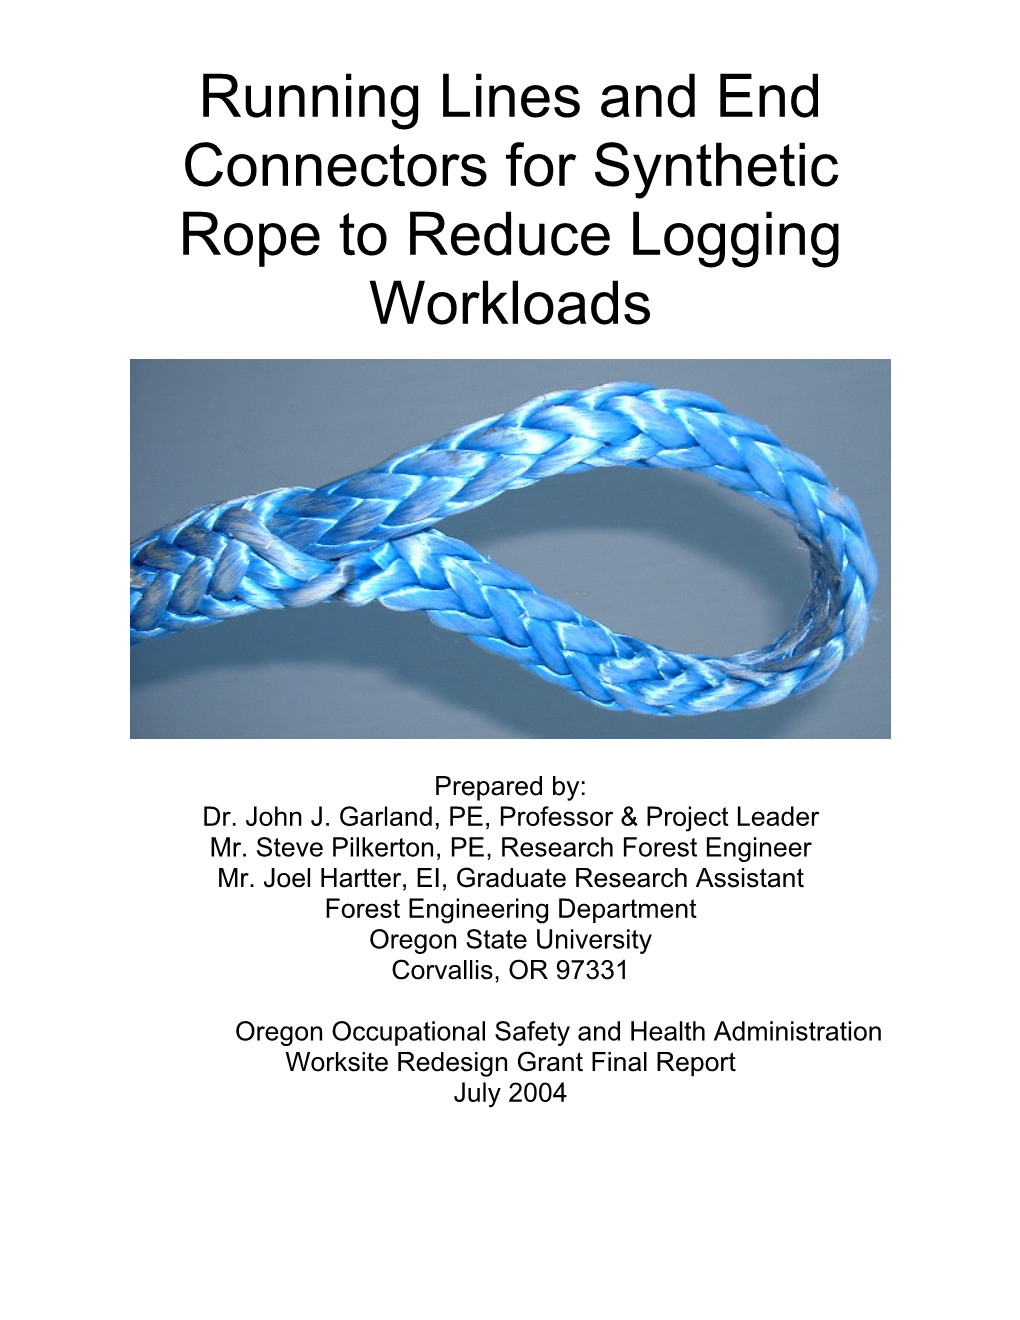 Running Lines and End Connectors for Synthetic Rope to Reduce Logging